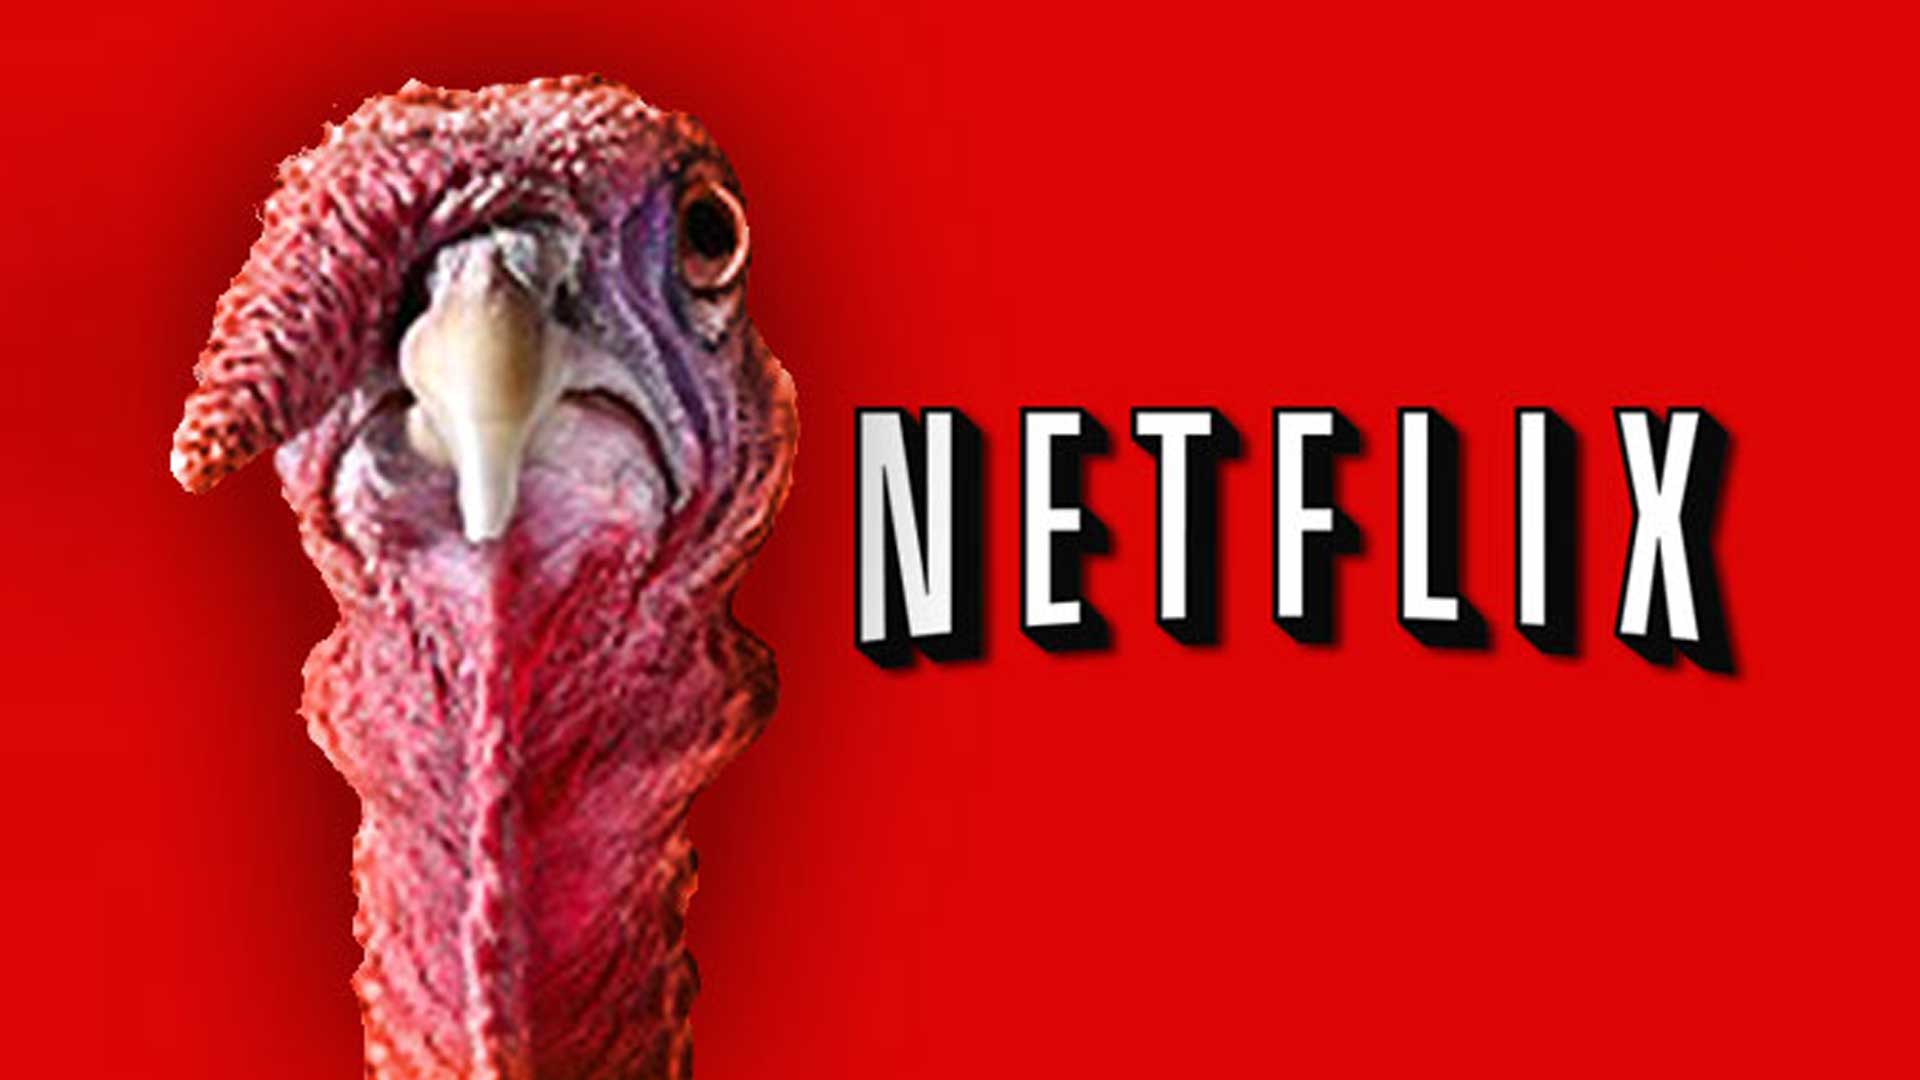 What to Watch on Netflix on Thanksgiving Day